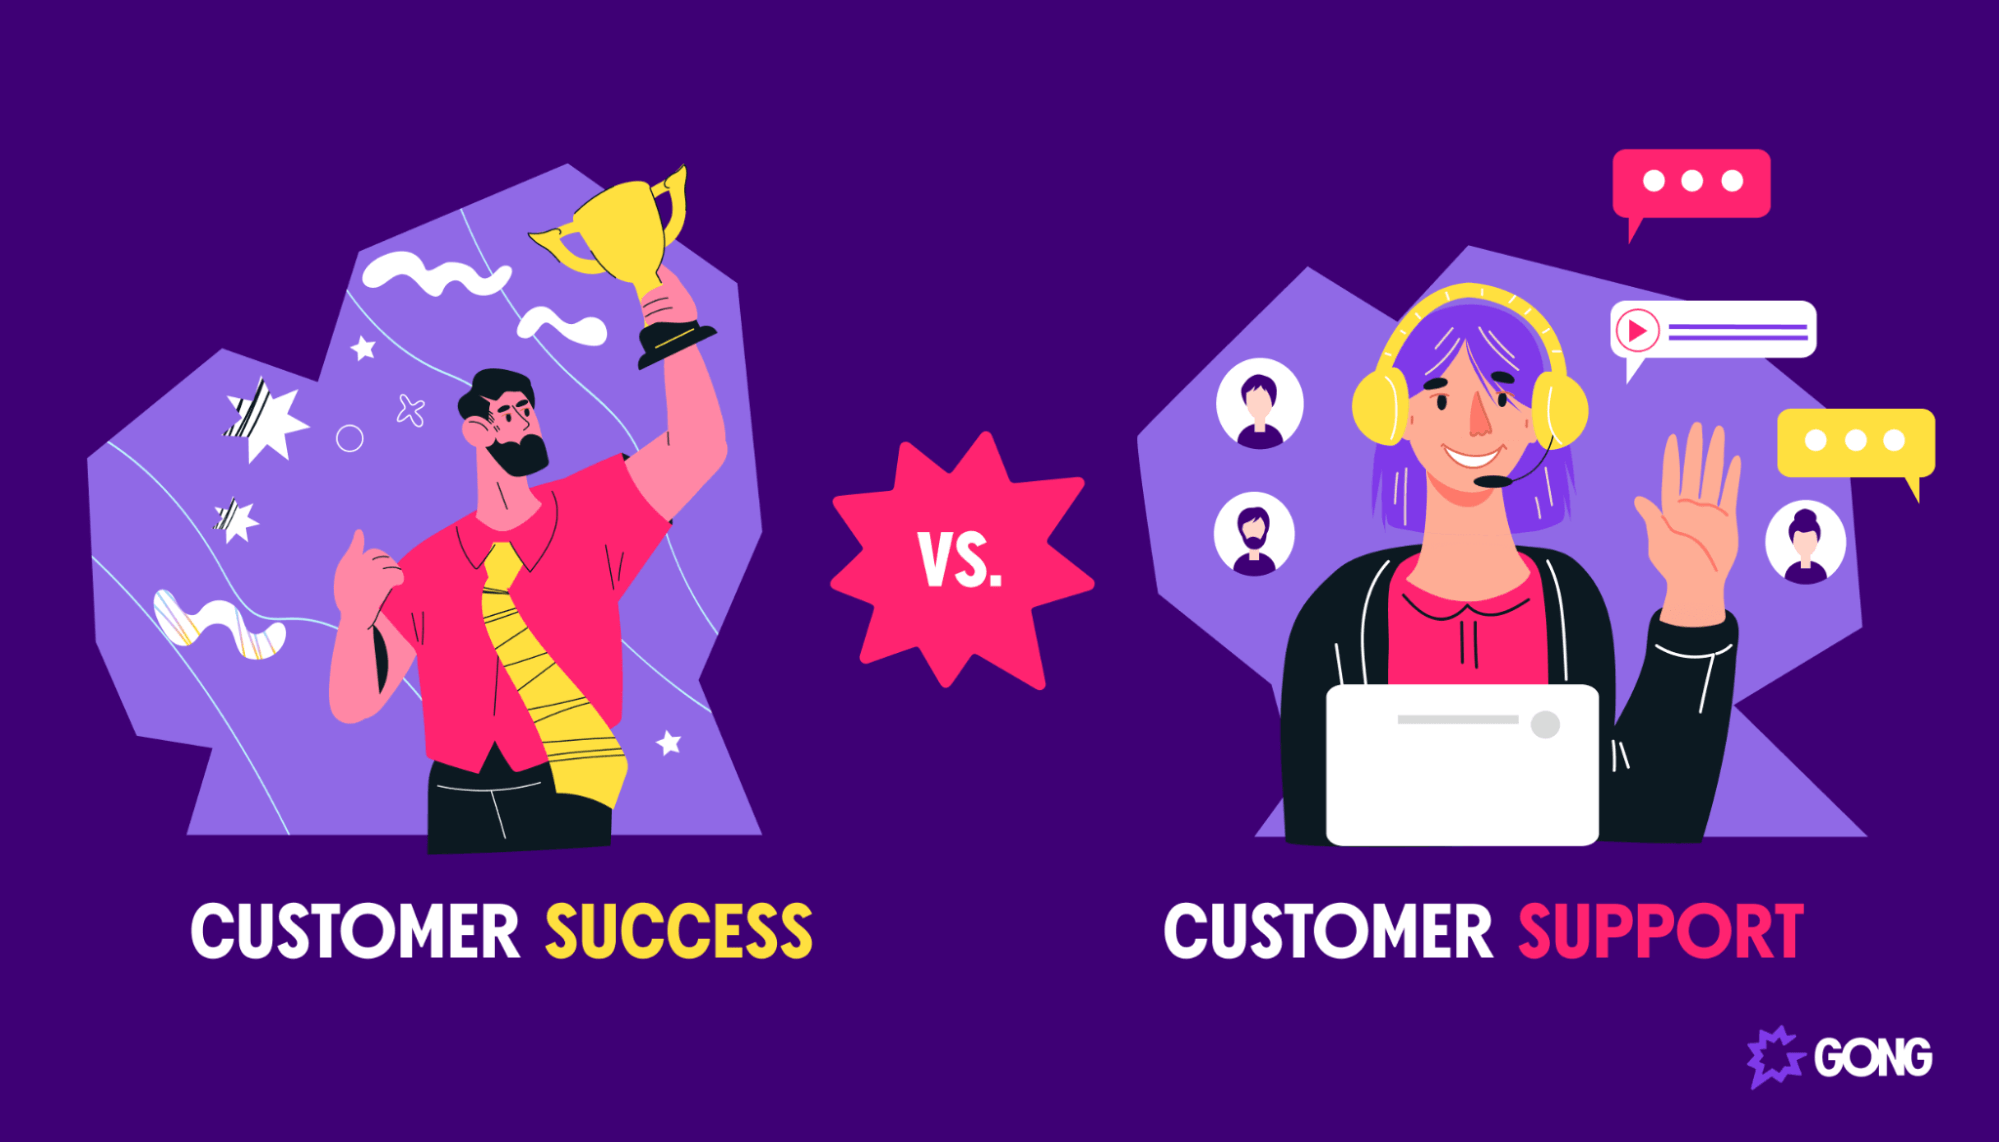 Comparison between customer support and customer success